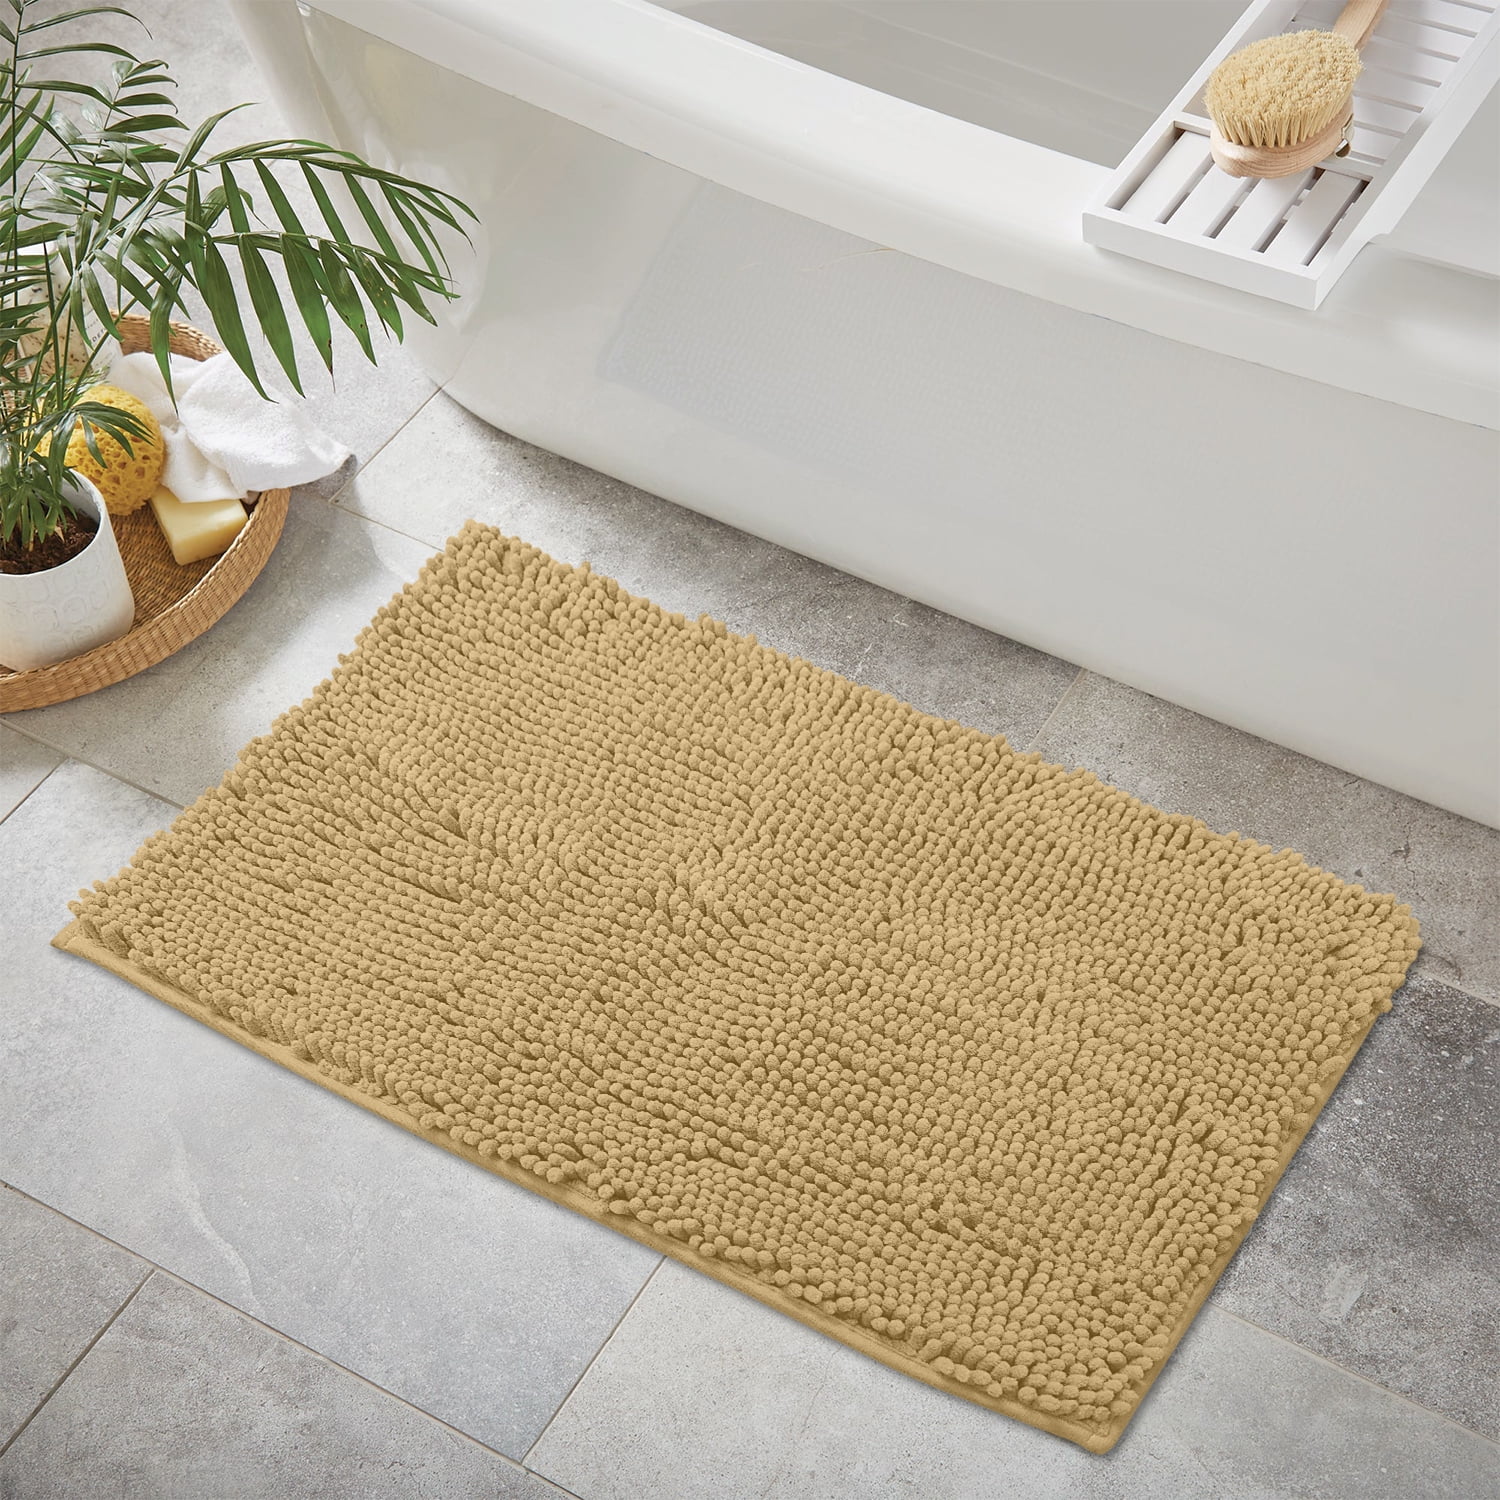 Bathroom Rug Mat Super Absorbent Quick Dry – LUX HOUSEHOLDS